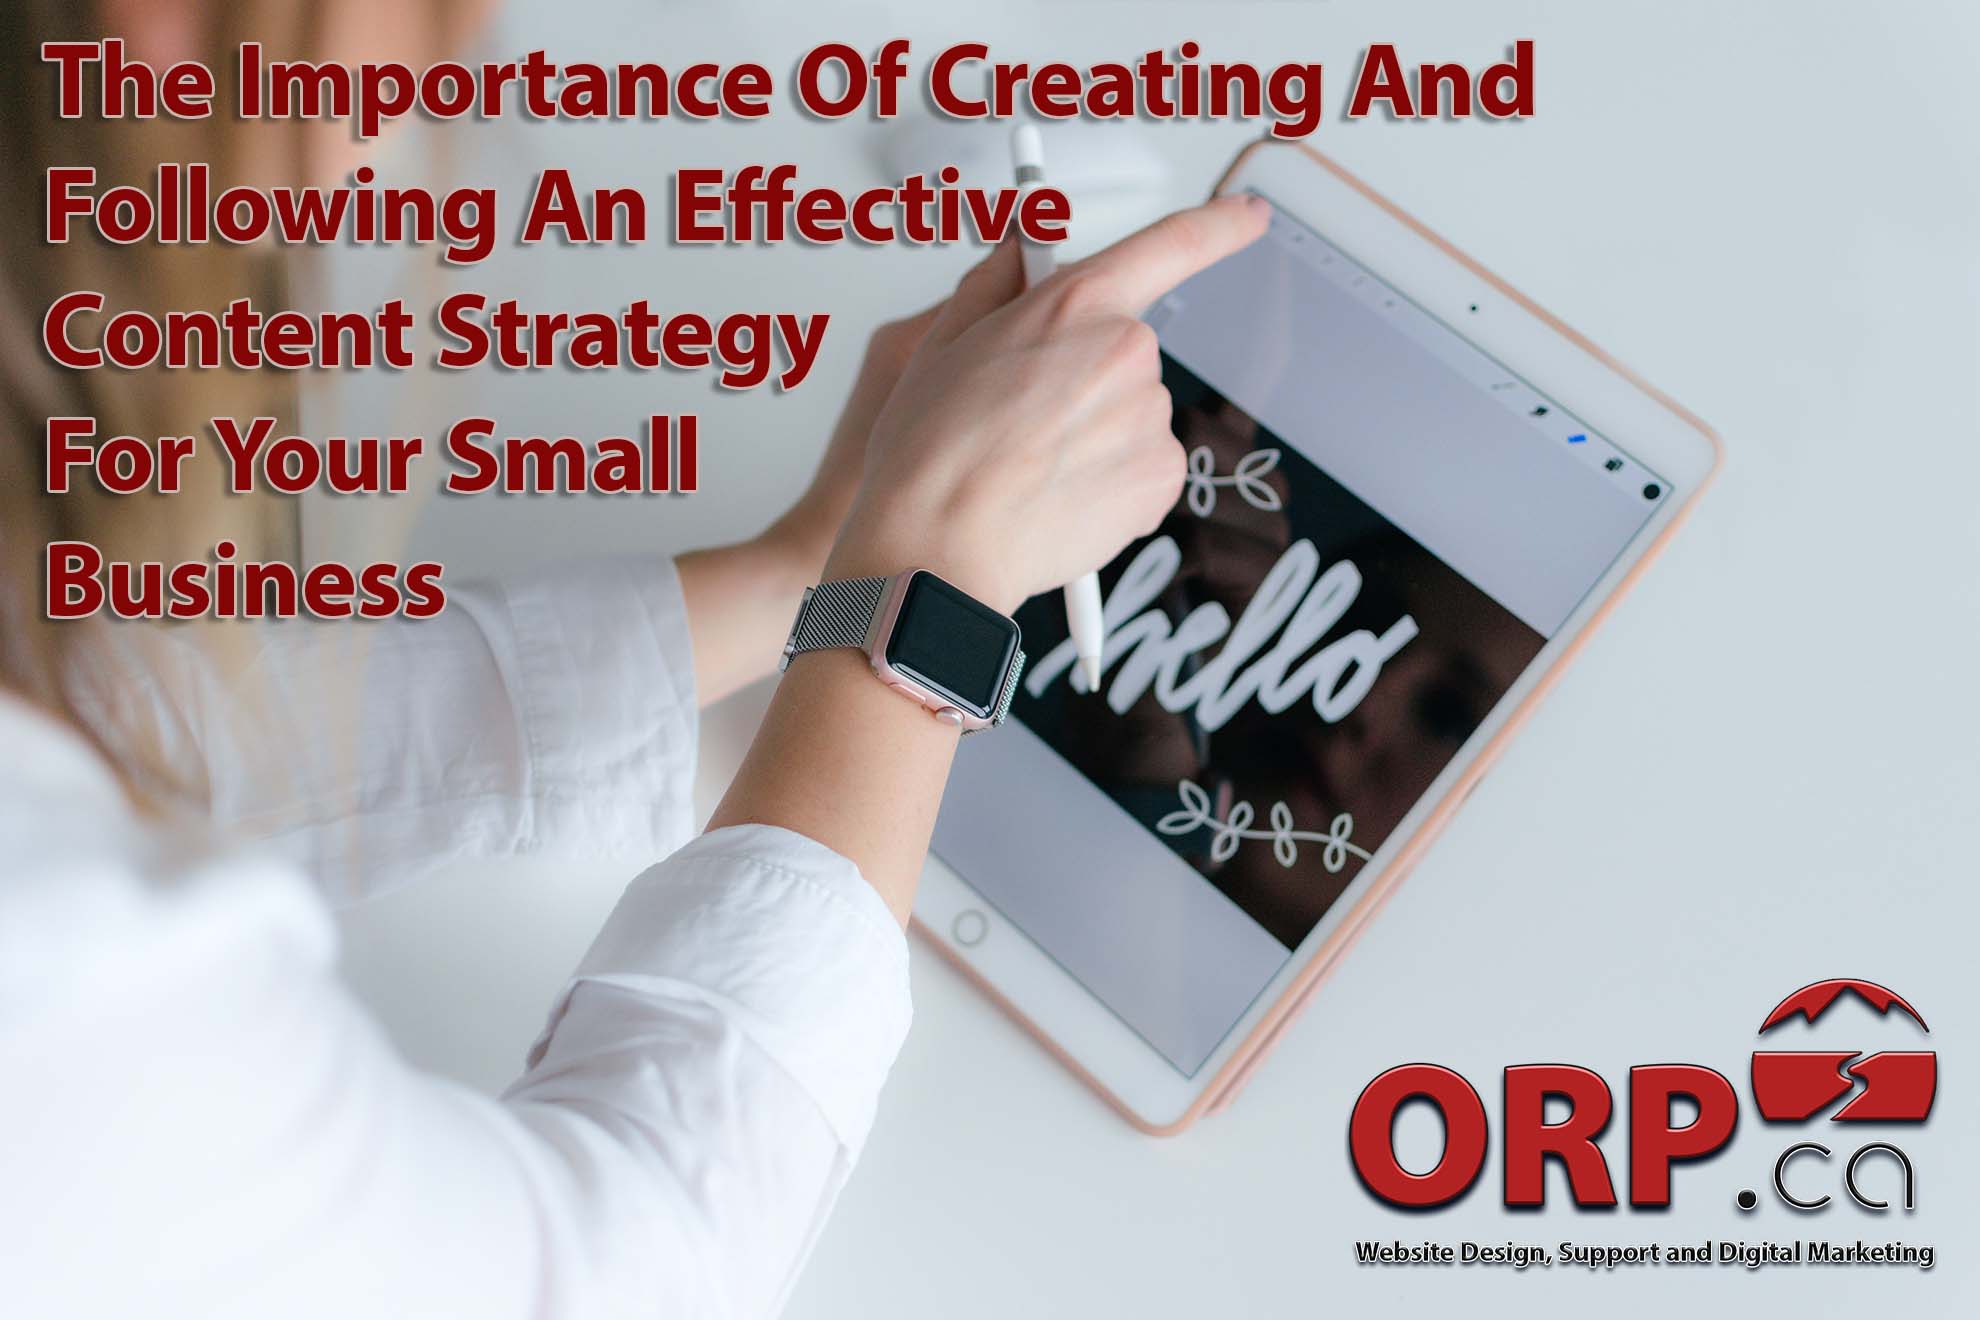 The Importance Of Creating And Following An Effective Content Strategy For Your Small Business a digital marketing article from ORP.ca, providing small business marketing and website design services since 2003